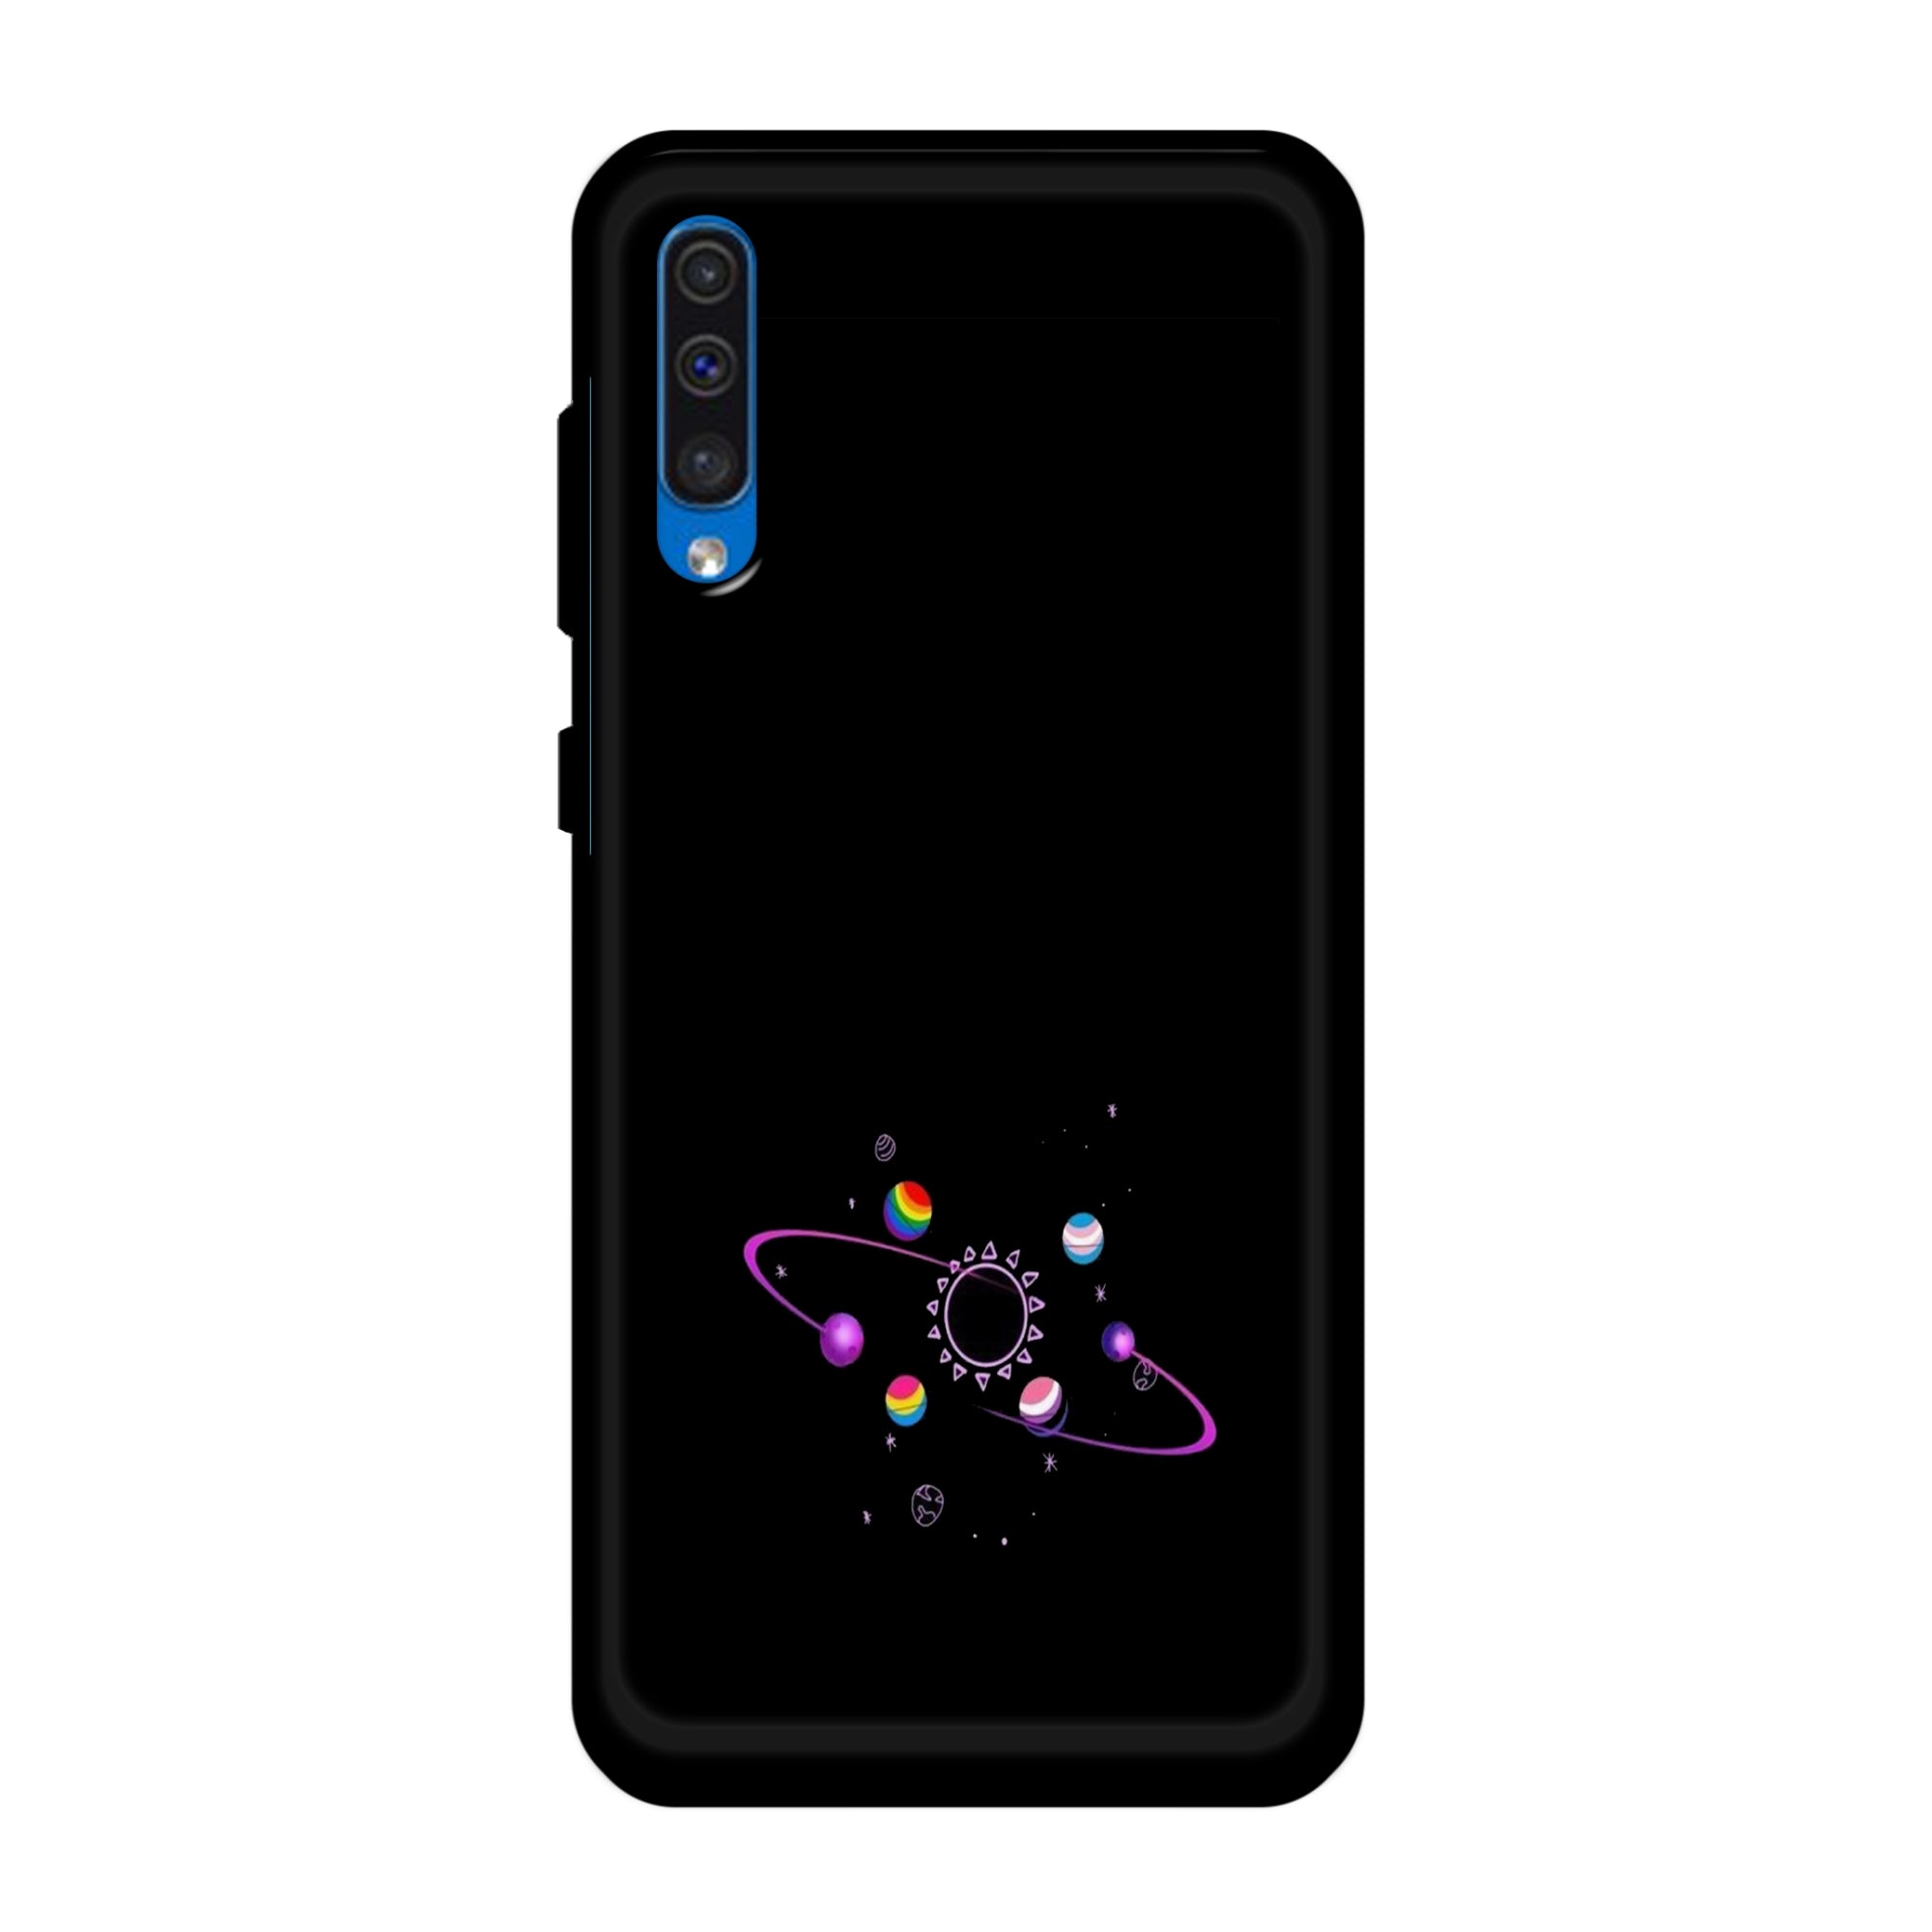 Buy Galaxy Metal-Silicon Back Mobile Phone Case/Cover For Samsung Galaxy A50 / A50s / A30s Online